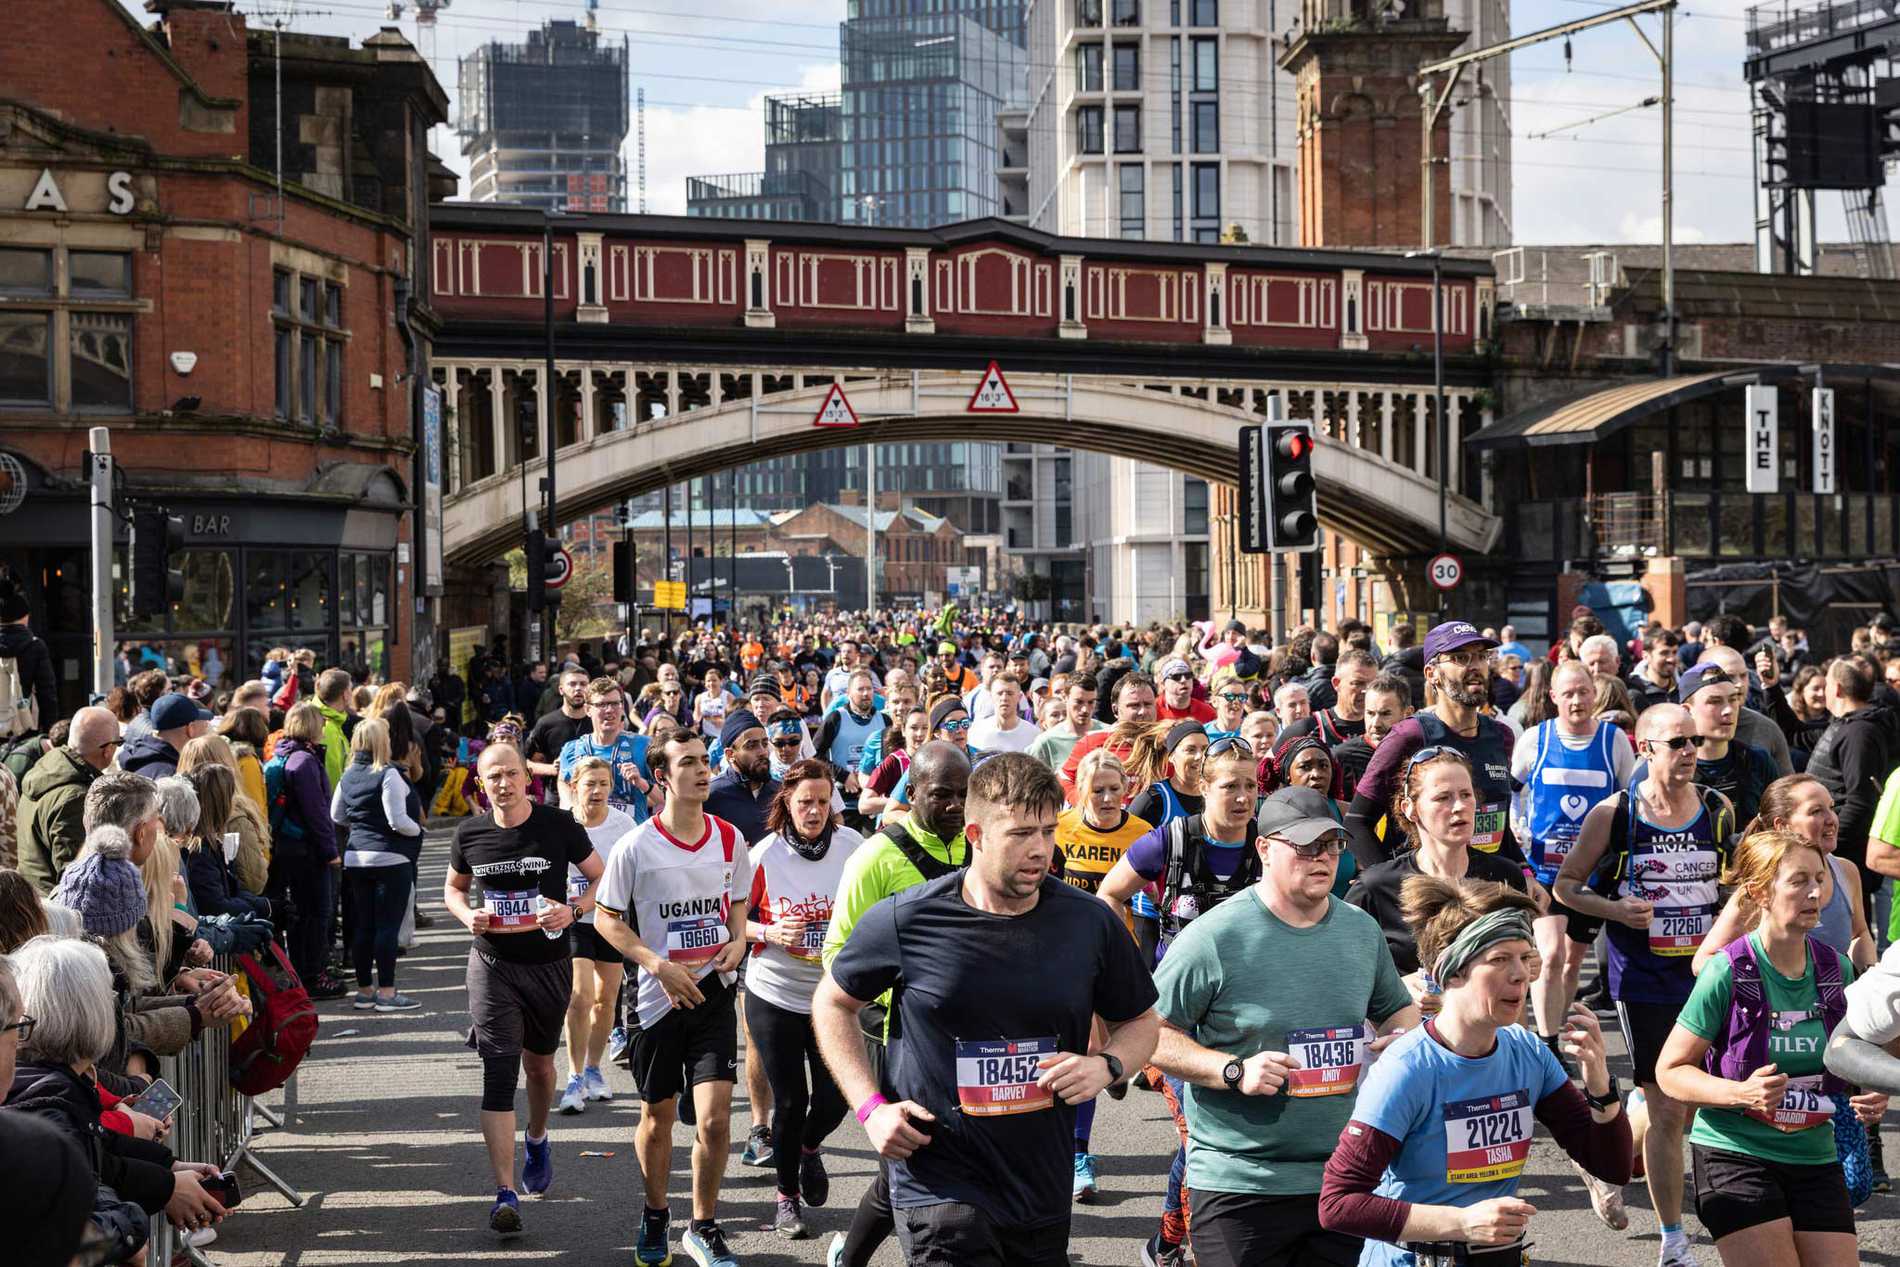 Runners making their way along Castle Street during the Manchester Marathon.